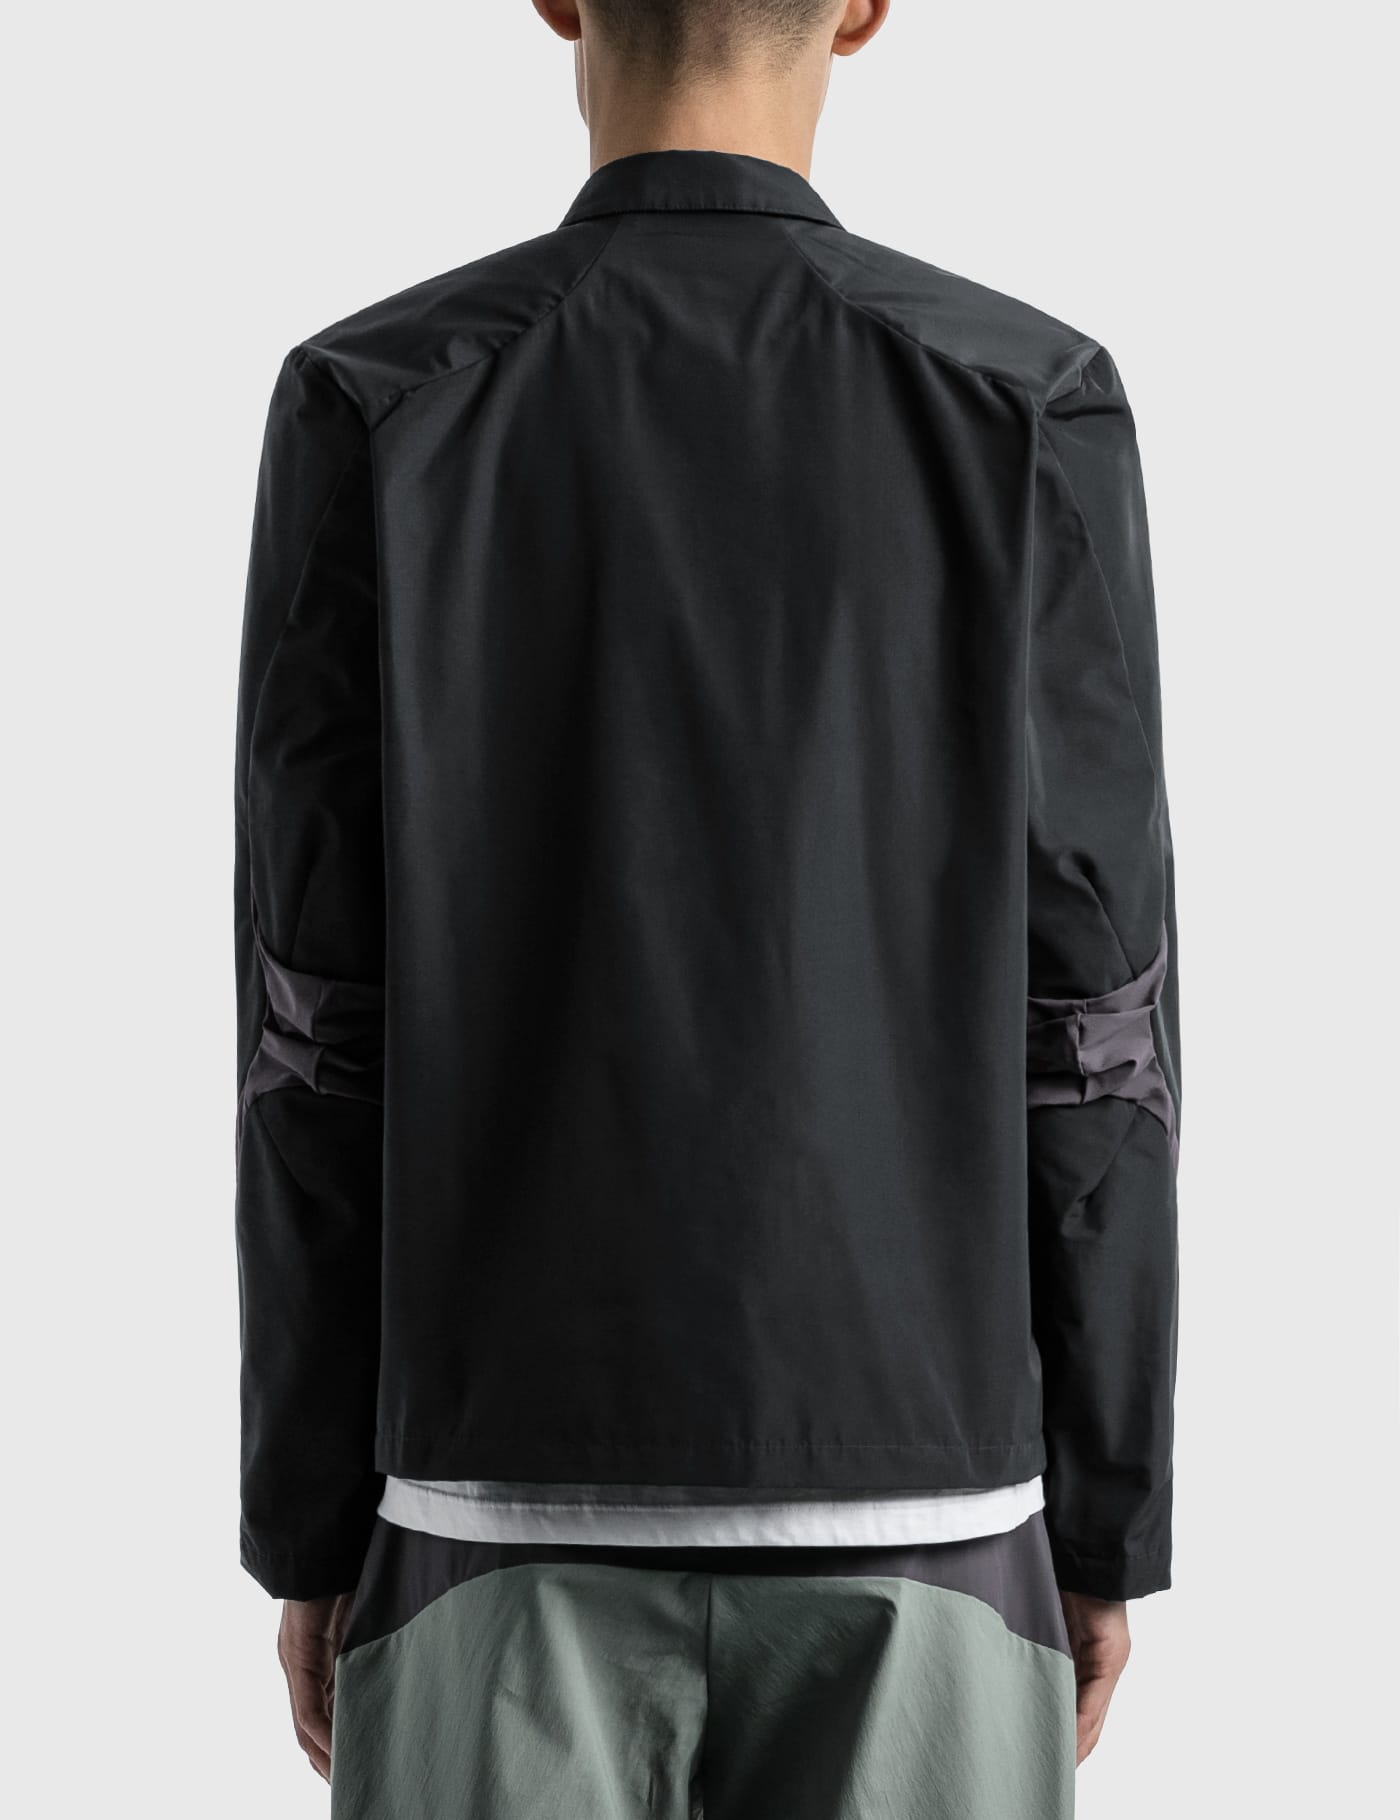 POST ARCHIVE FACTION (PAF) - 4.0 Jacket Right | HBX - Globally 